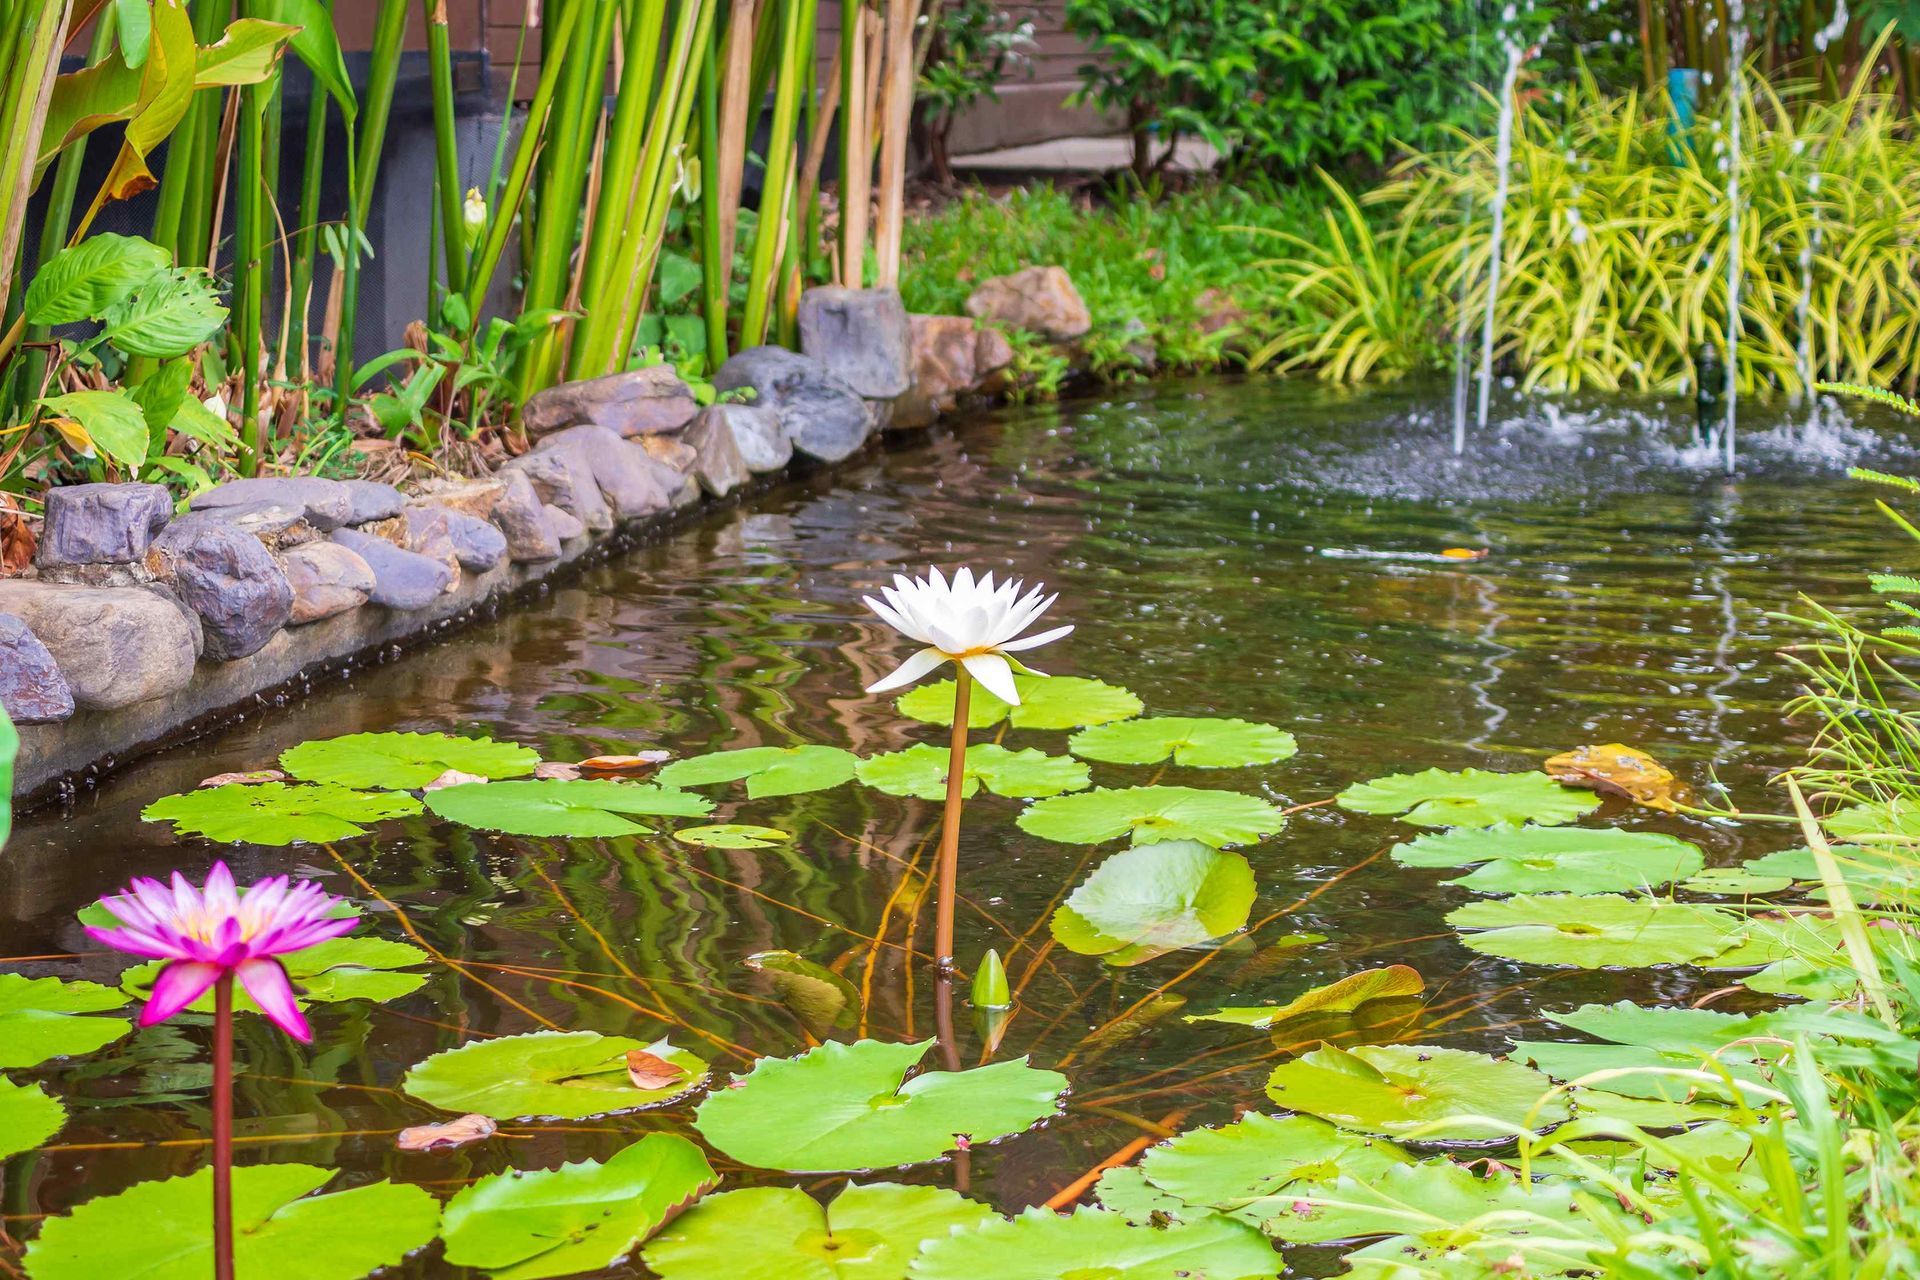 A flower growing out of a water garden